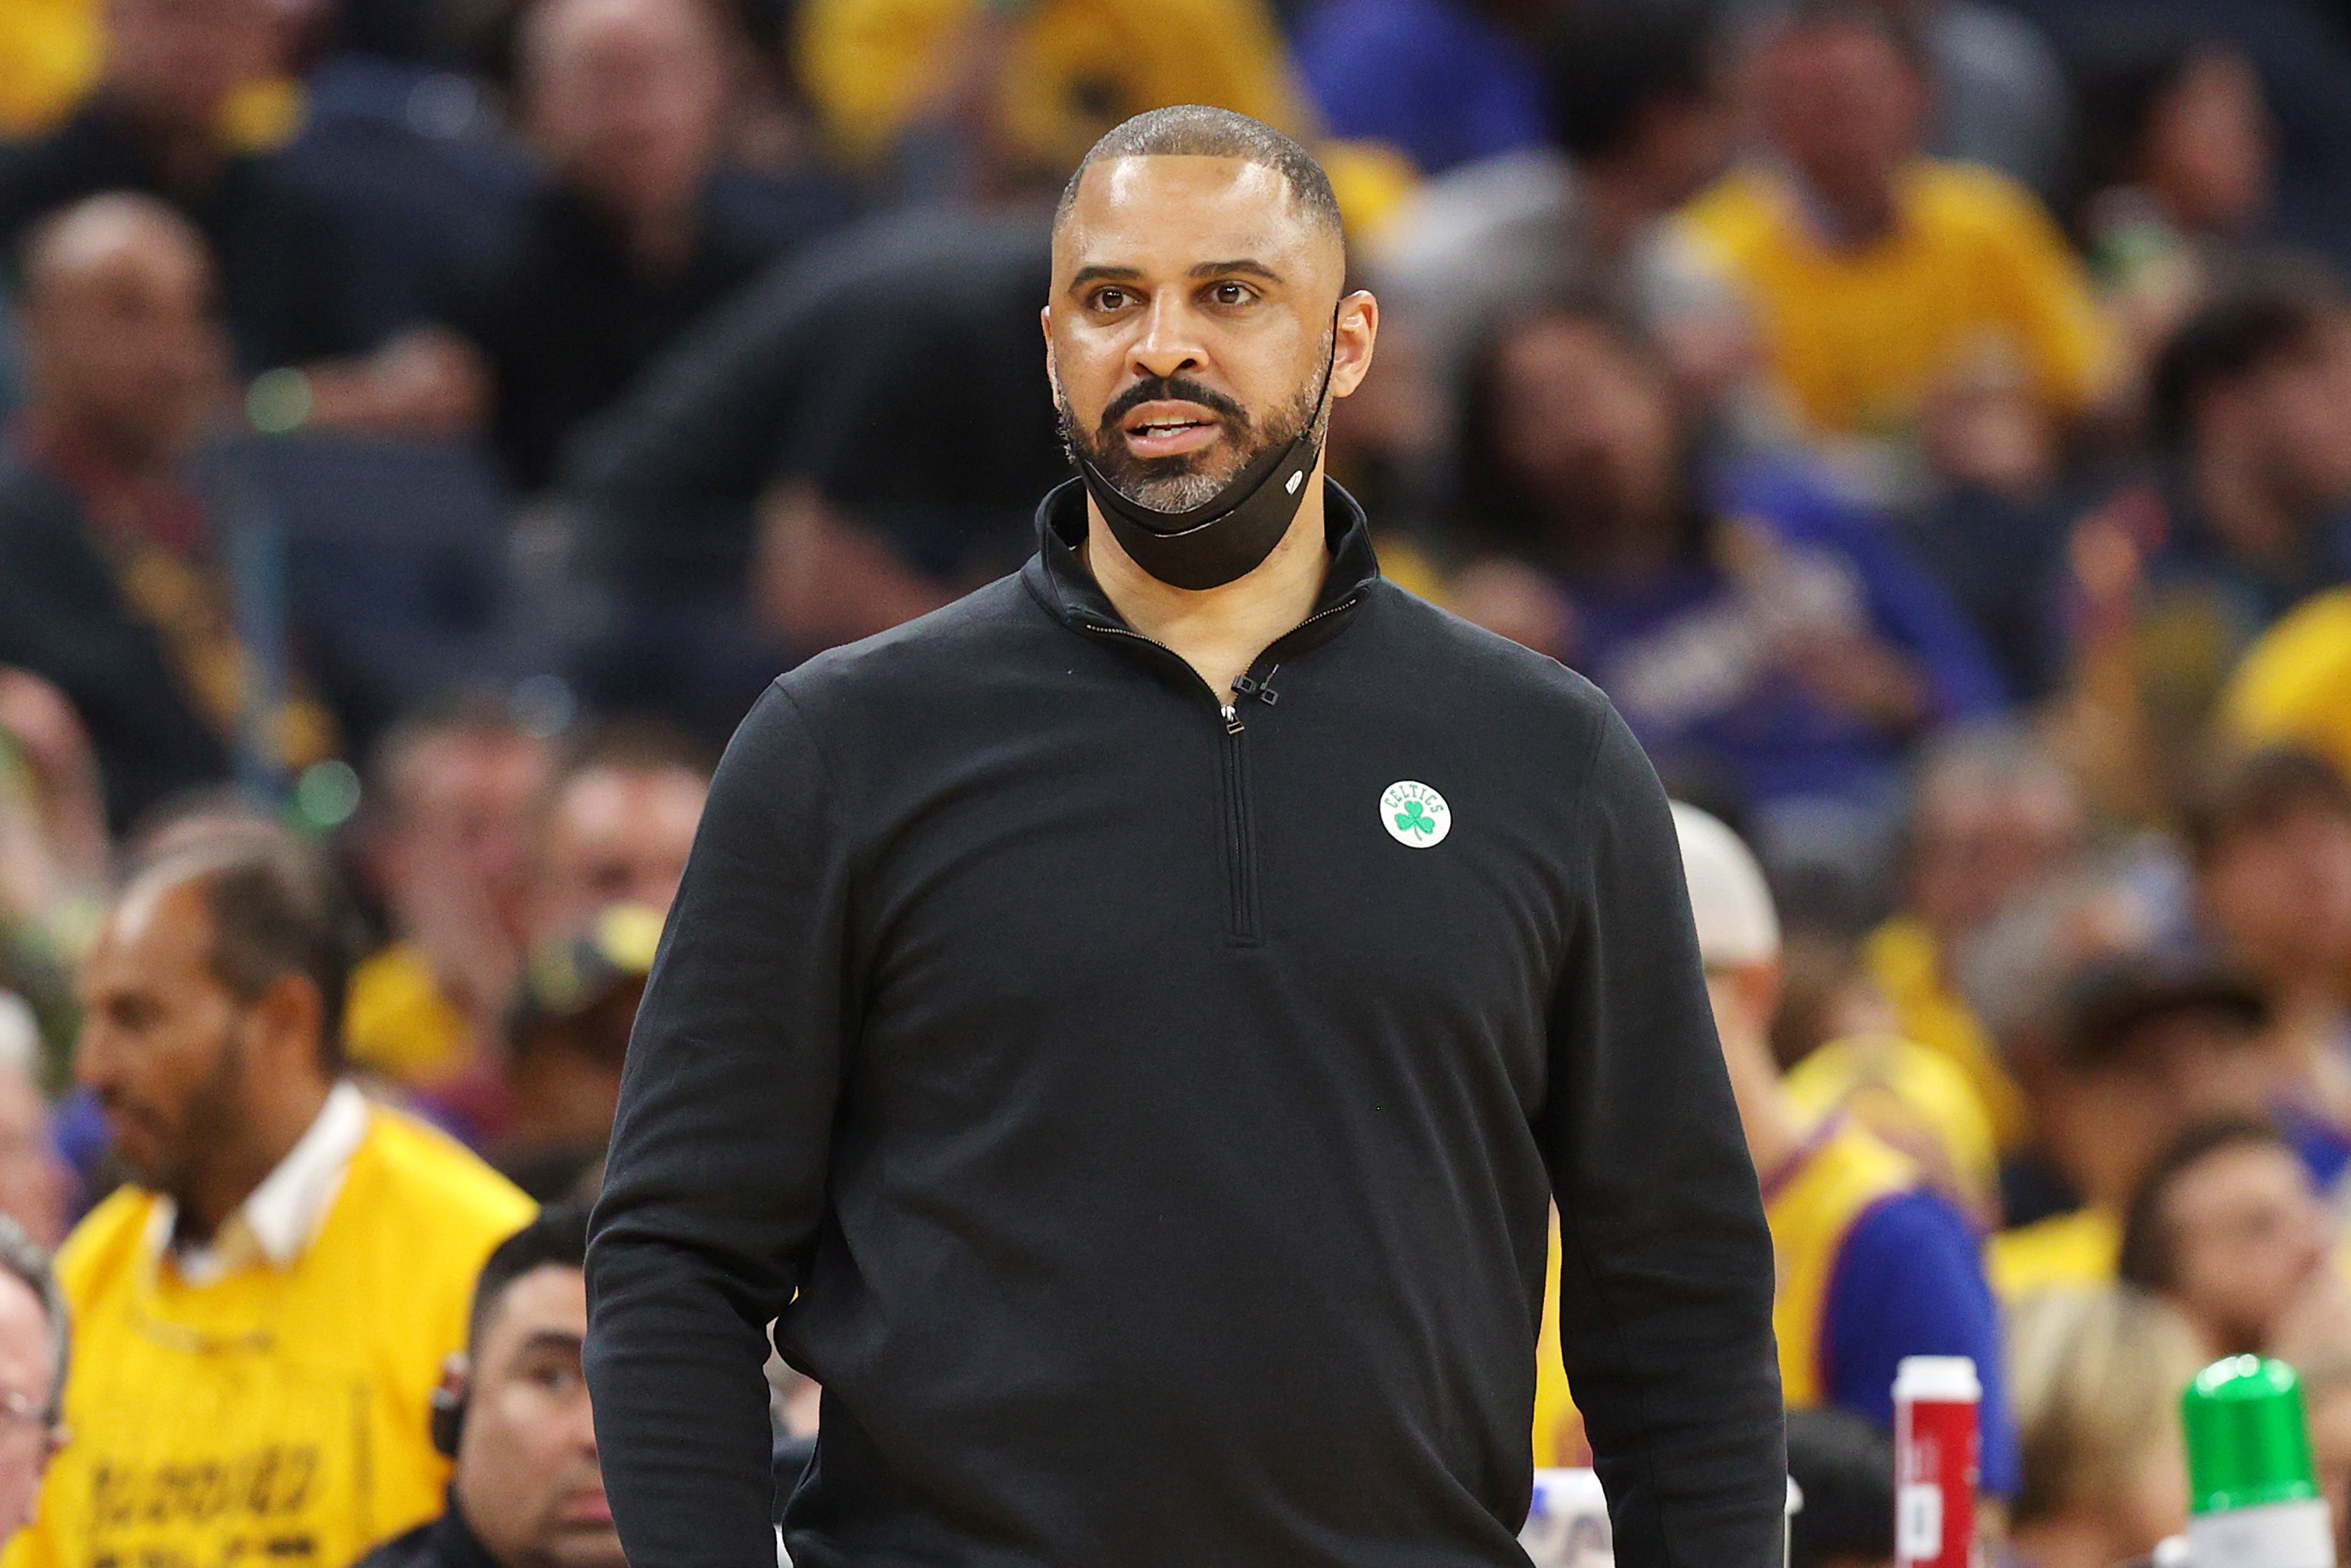 Head coach Ime Udoka of the Boston Celtics looks on during the second quarter against the Golden State Warriors.